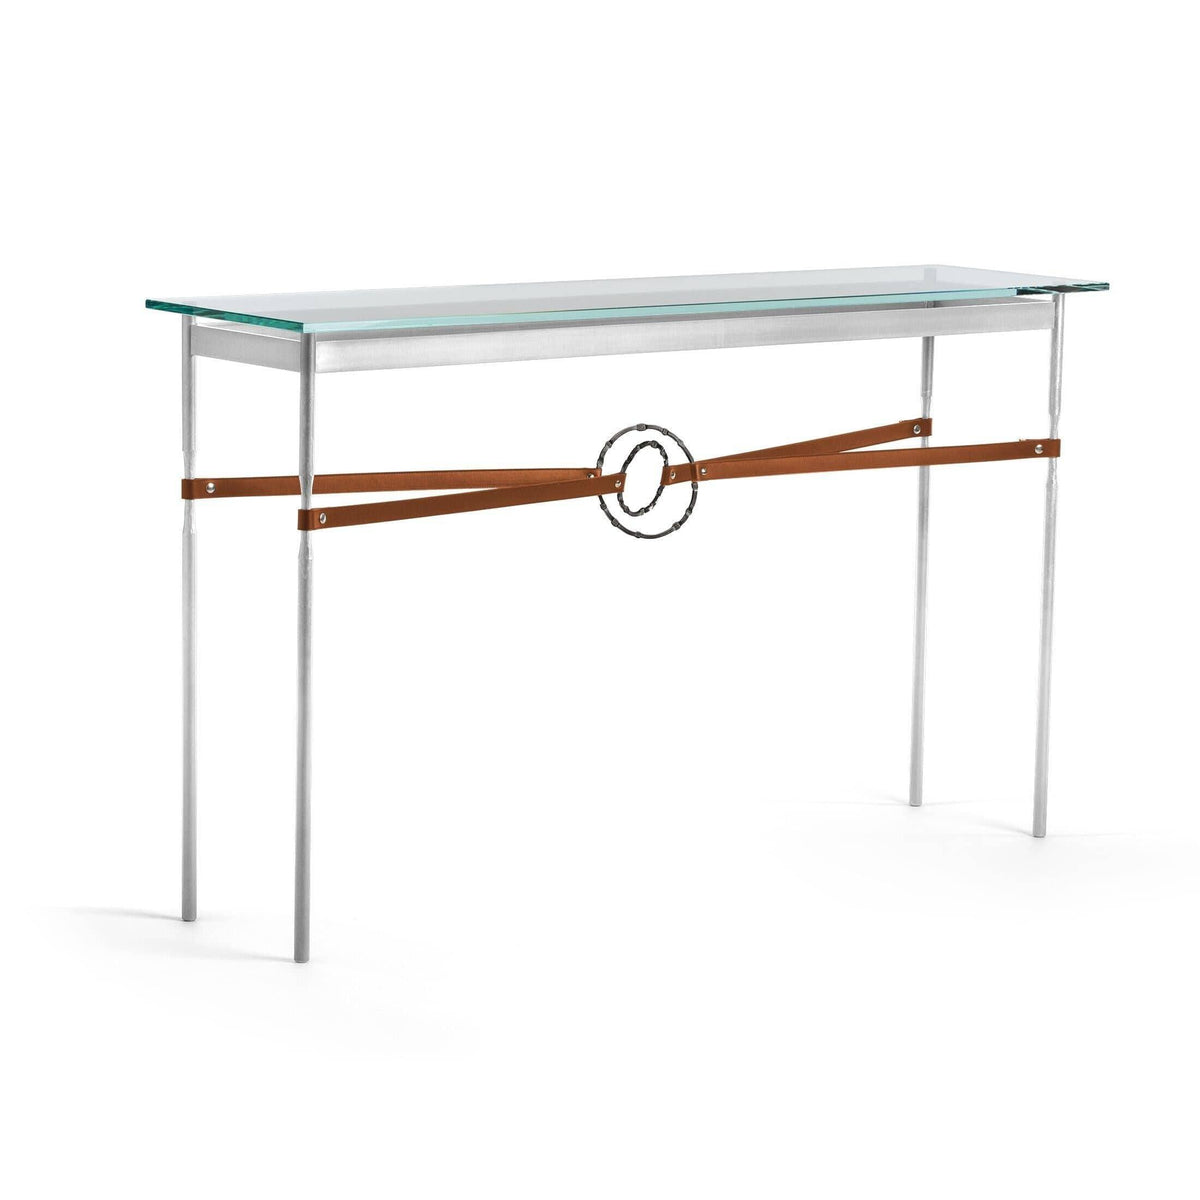 Hubbardton Forge - Equus Chestnut Leather Console Table - 750118-85-07-LC-VA0714 | Montreal Lighting & Hardware